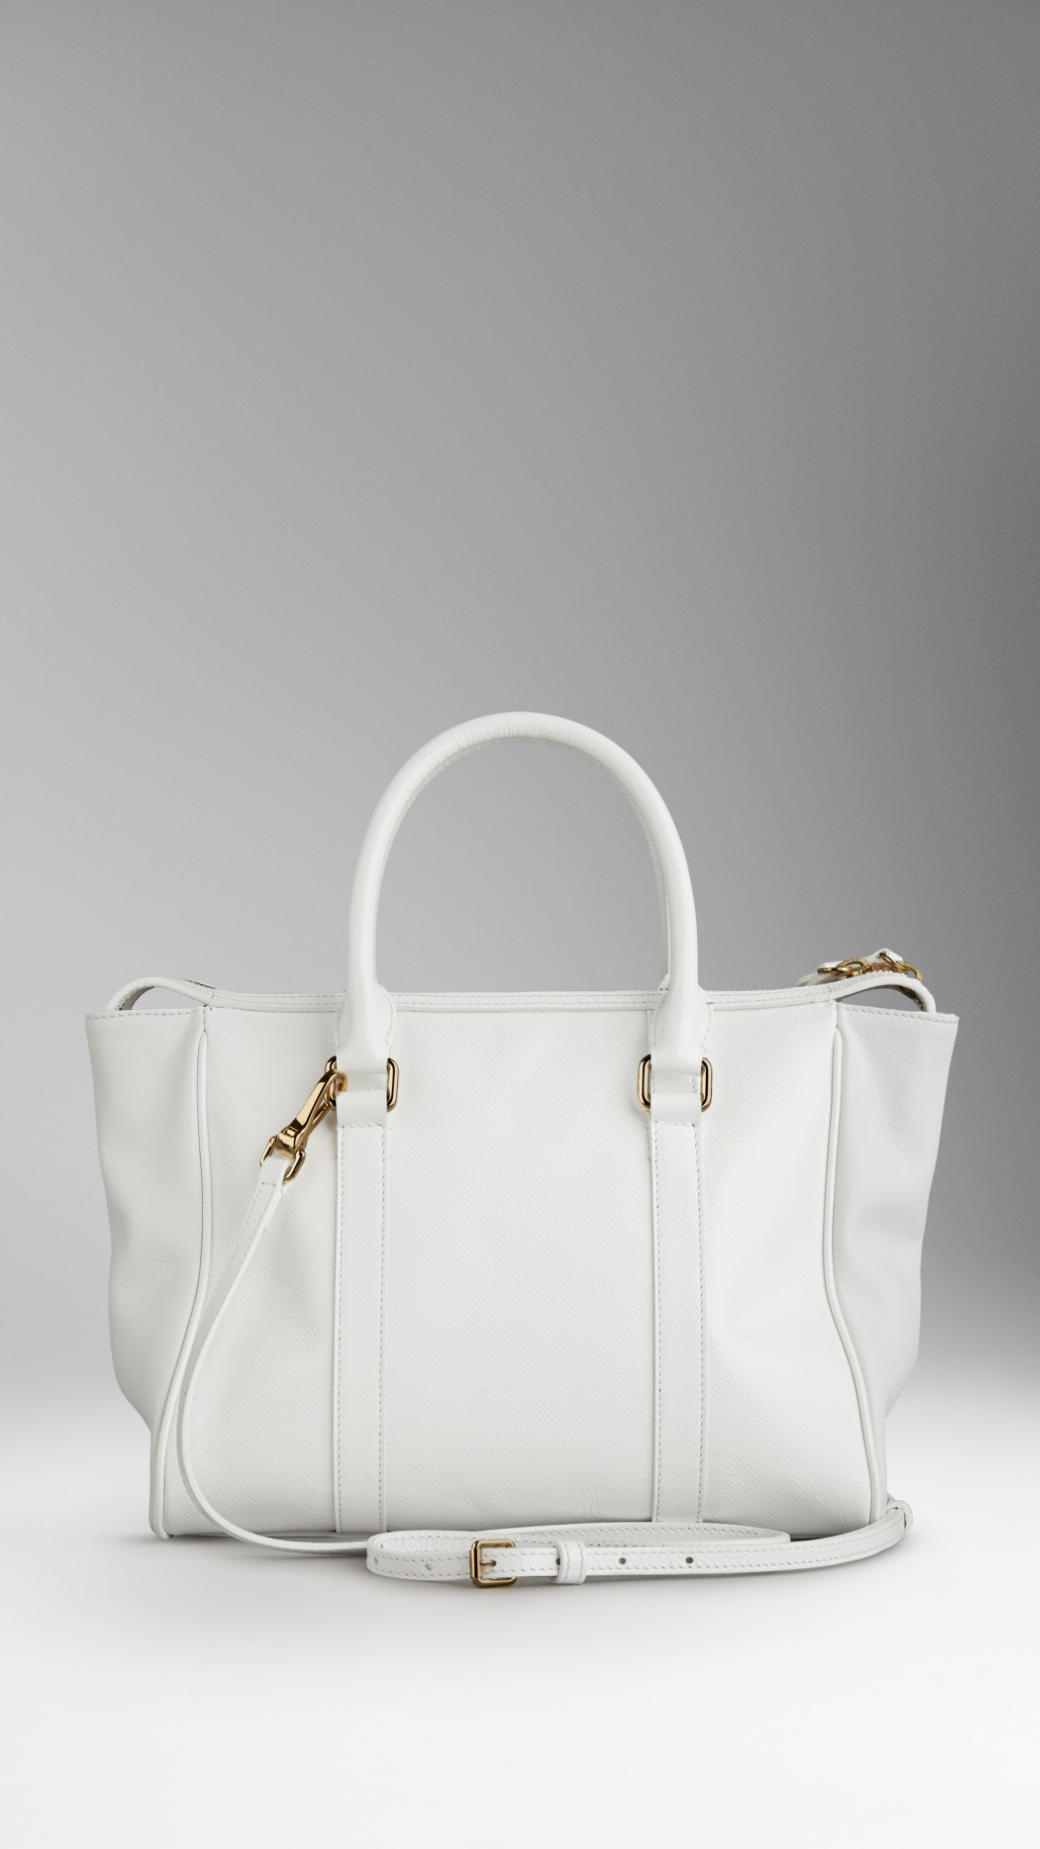 Burberry Medium Patent London Leather Tote Bag in White - Lyst